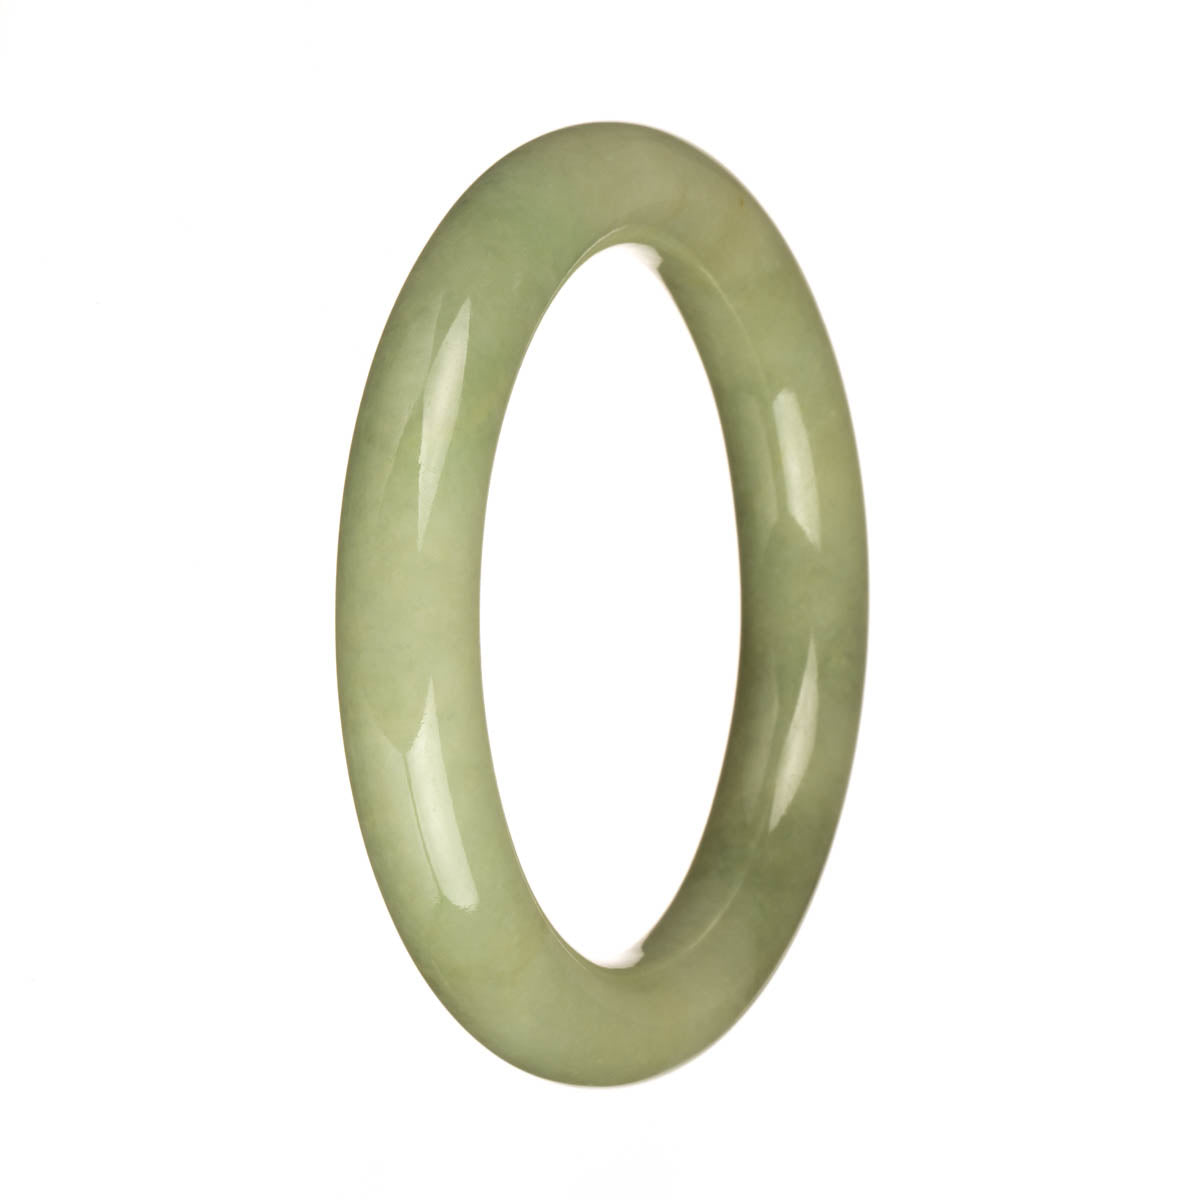 56mm Green with Brown Patch Jade Bangle Bracelet